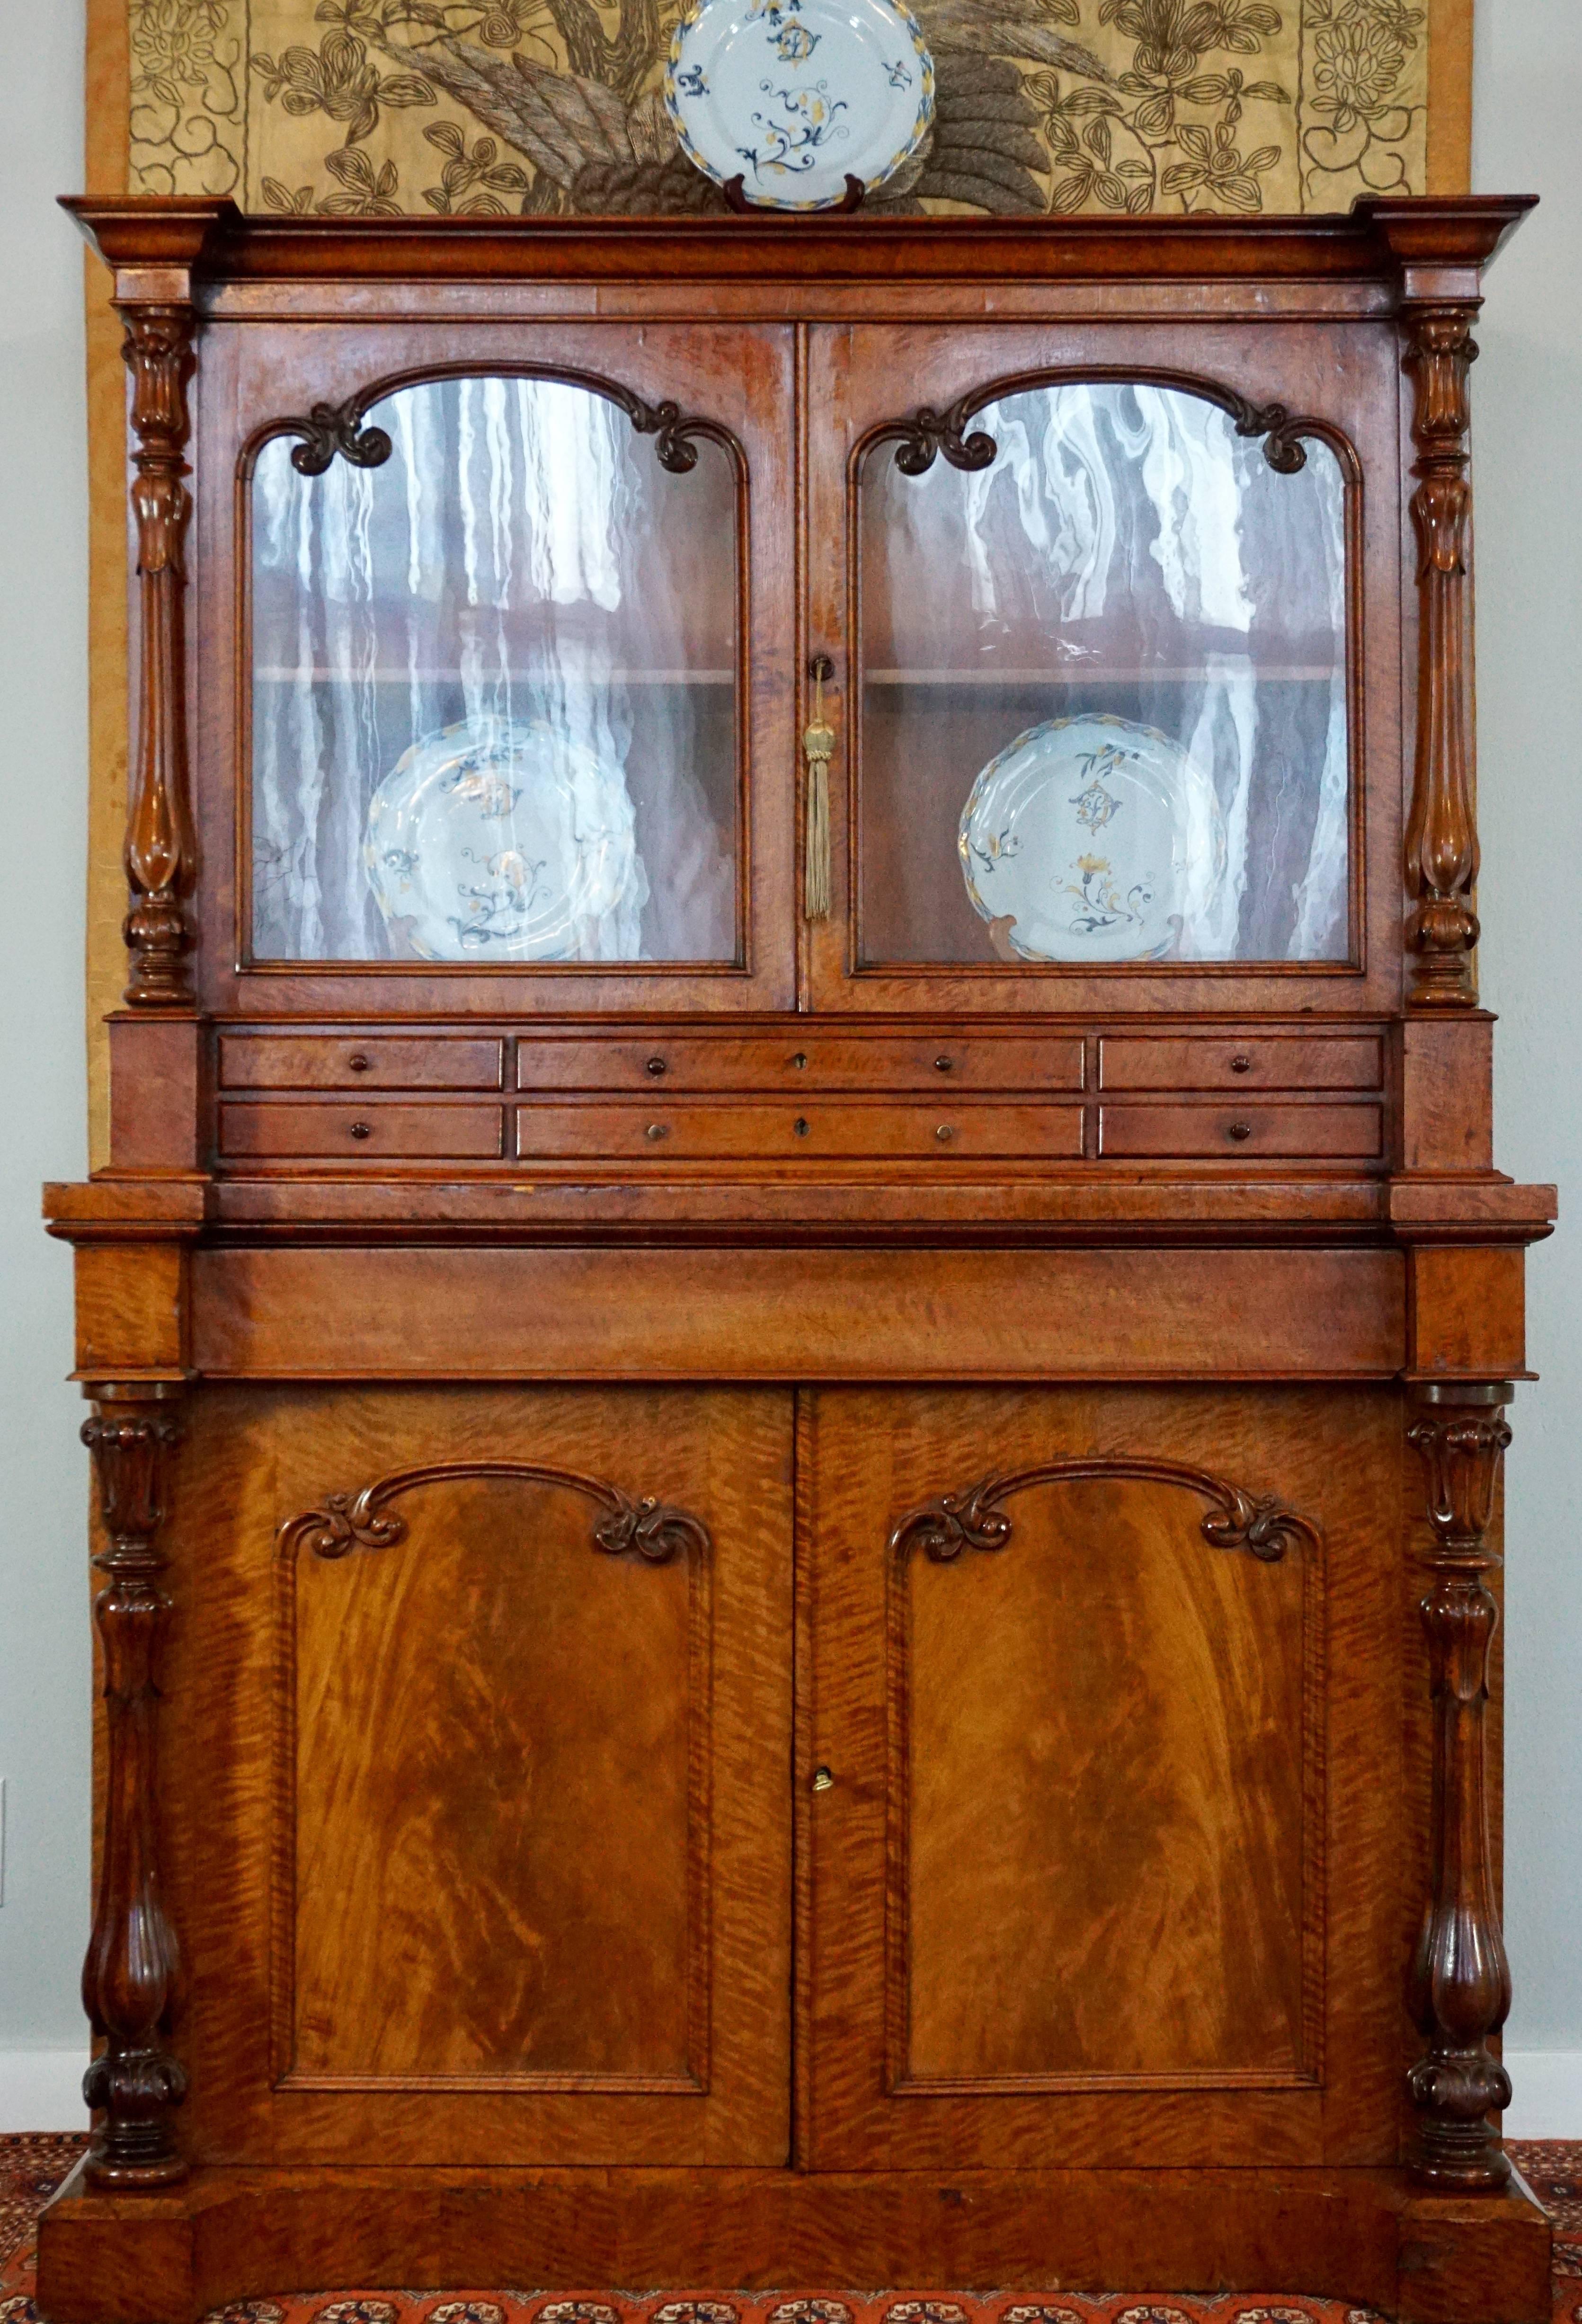 English Victorian flame mahogany bookcase, with fine carvings and good patina, and original wavy glass doors, two keys included.

circa 1870, 

Very good condition with wear commensurate of age and use!

Measures: Height 70 inches
Width 48